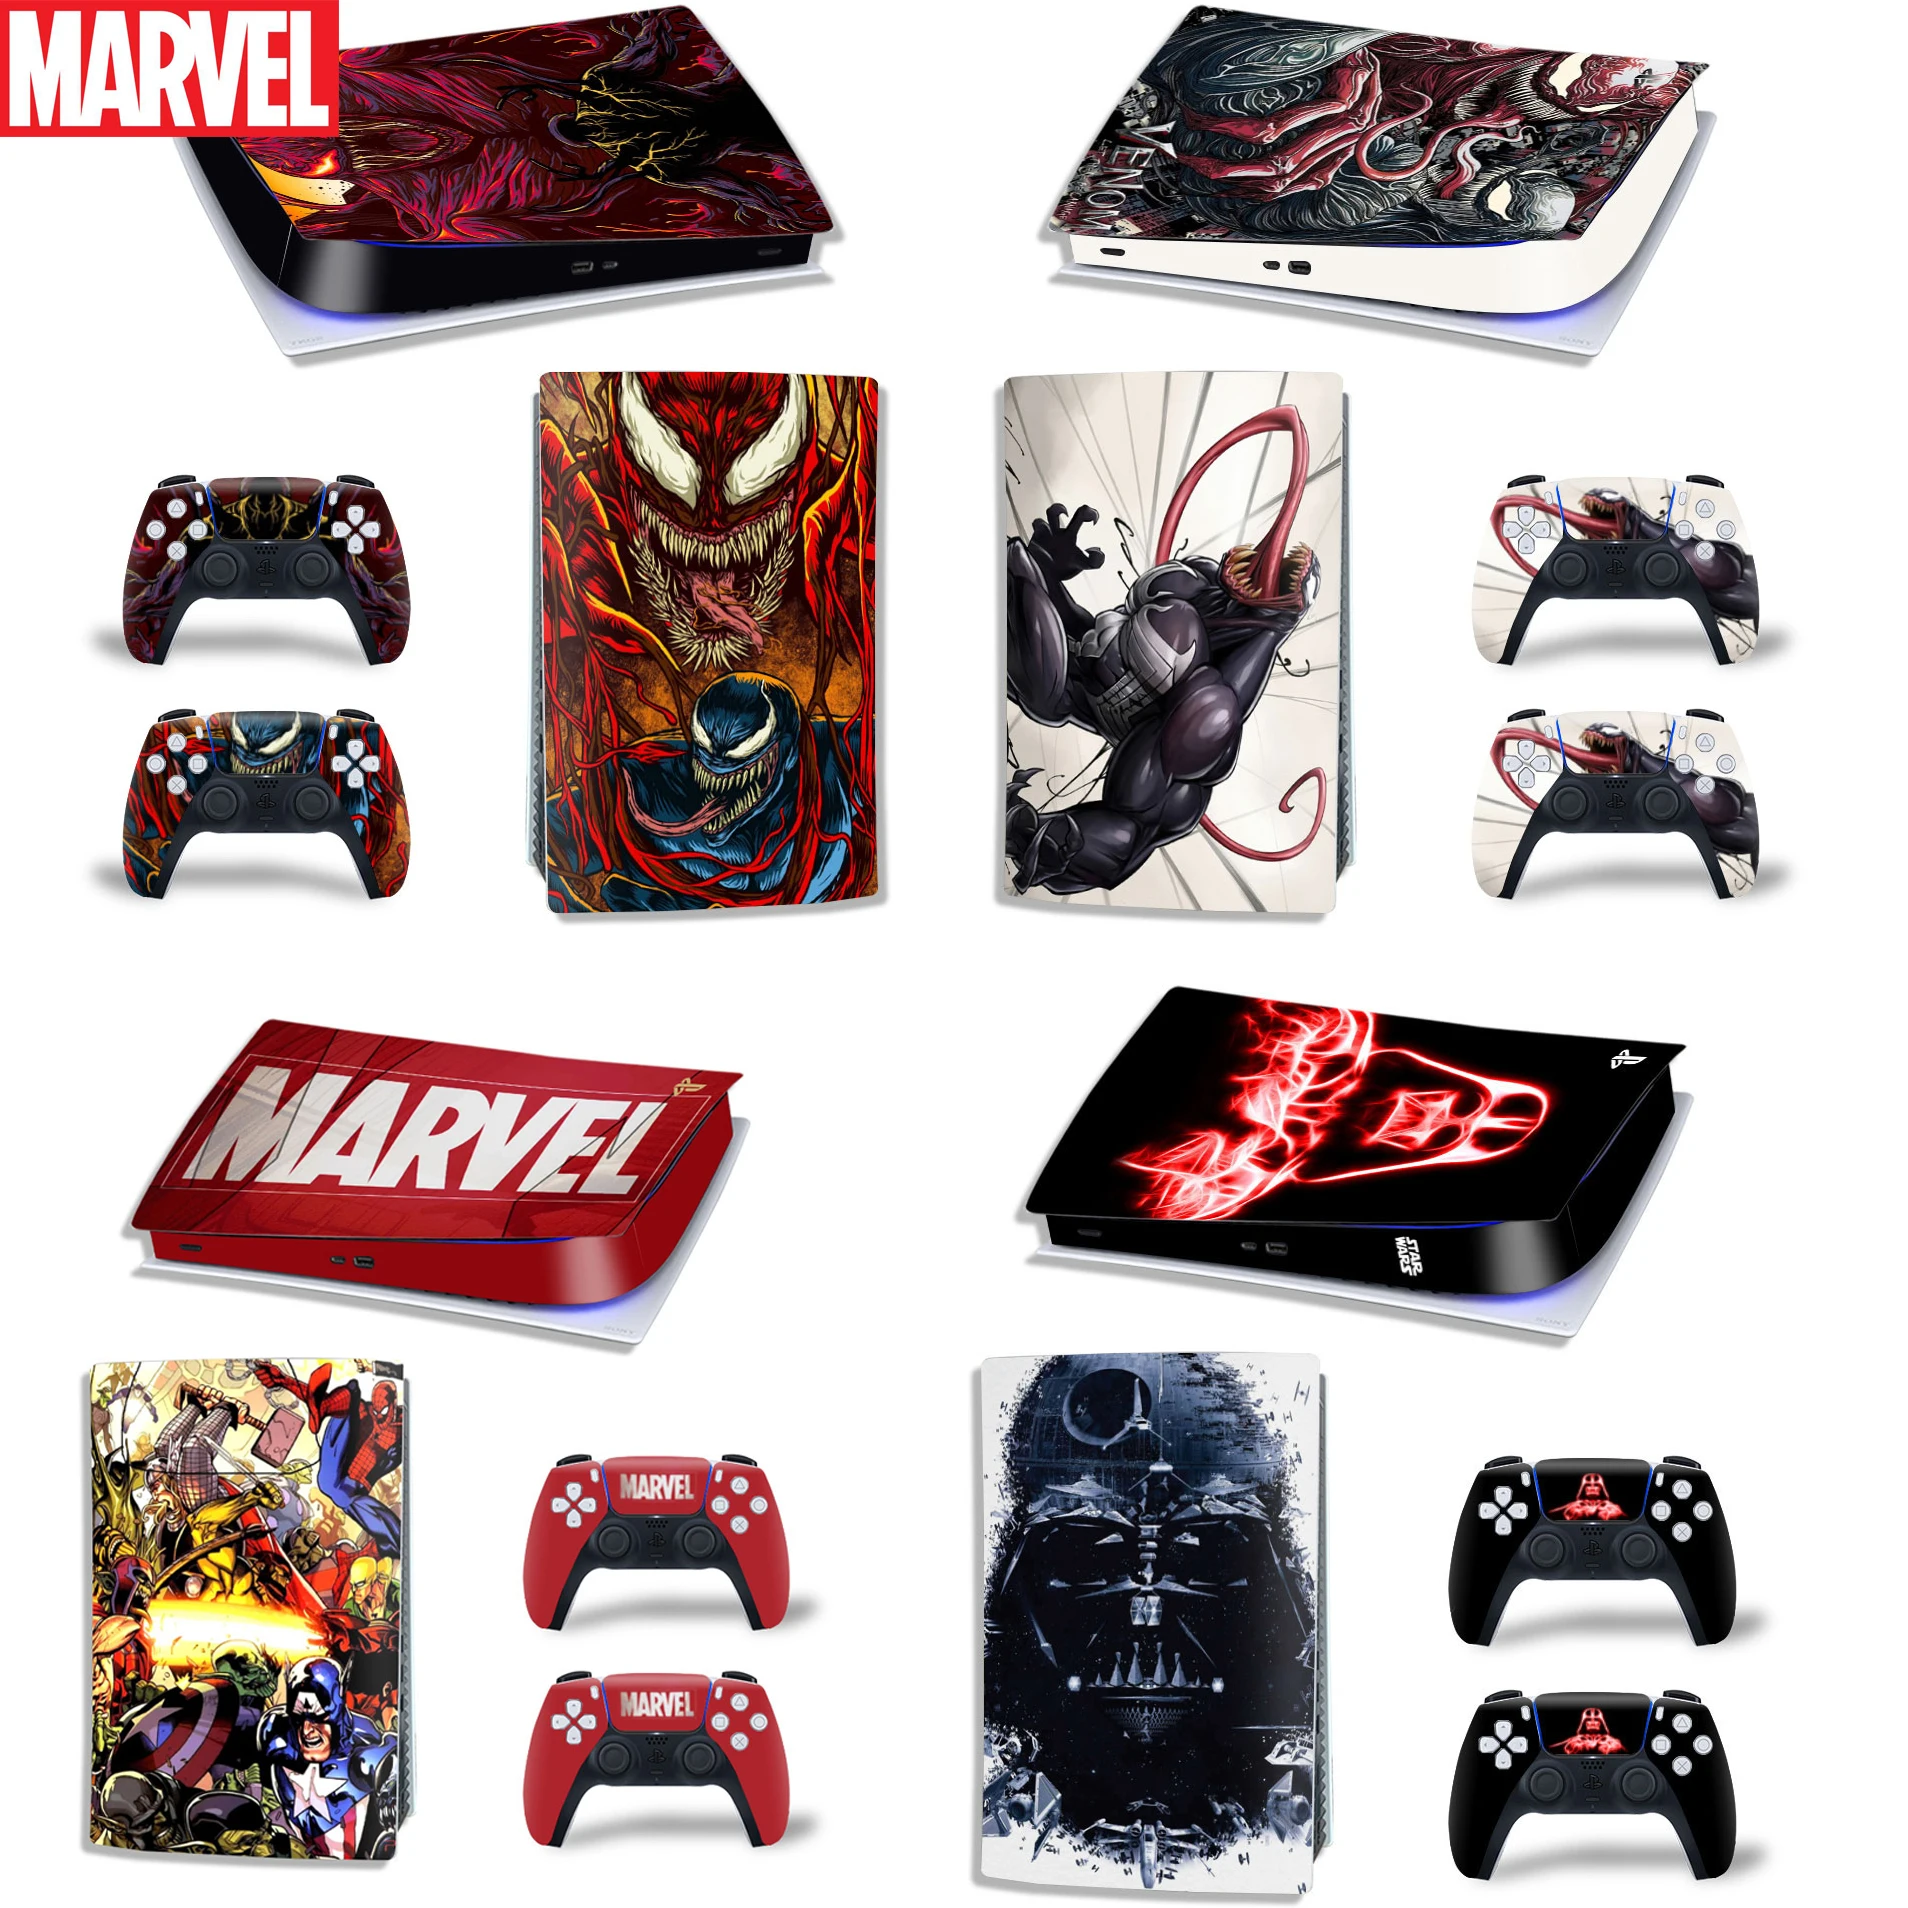 

Venom Carnage PS5 Digital Edition Skin Sticker Decal Cover for PlayStation 5 Console and 2 Controllers PS5 Skin Sticker Vinyl